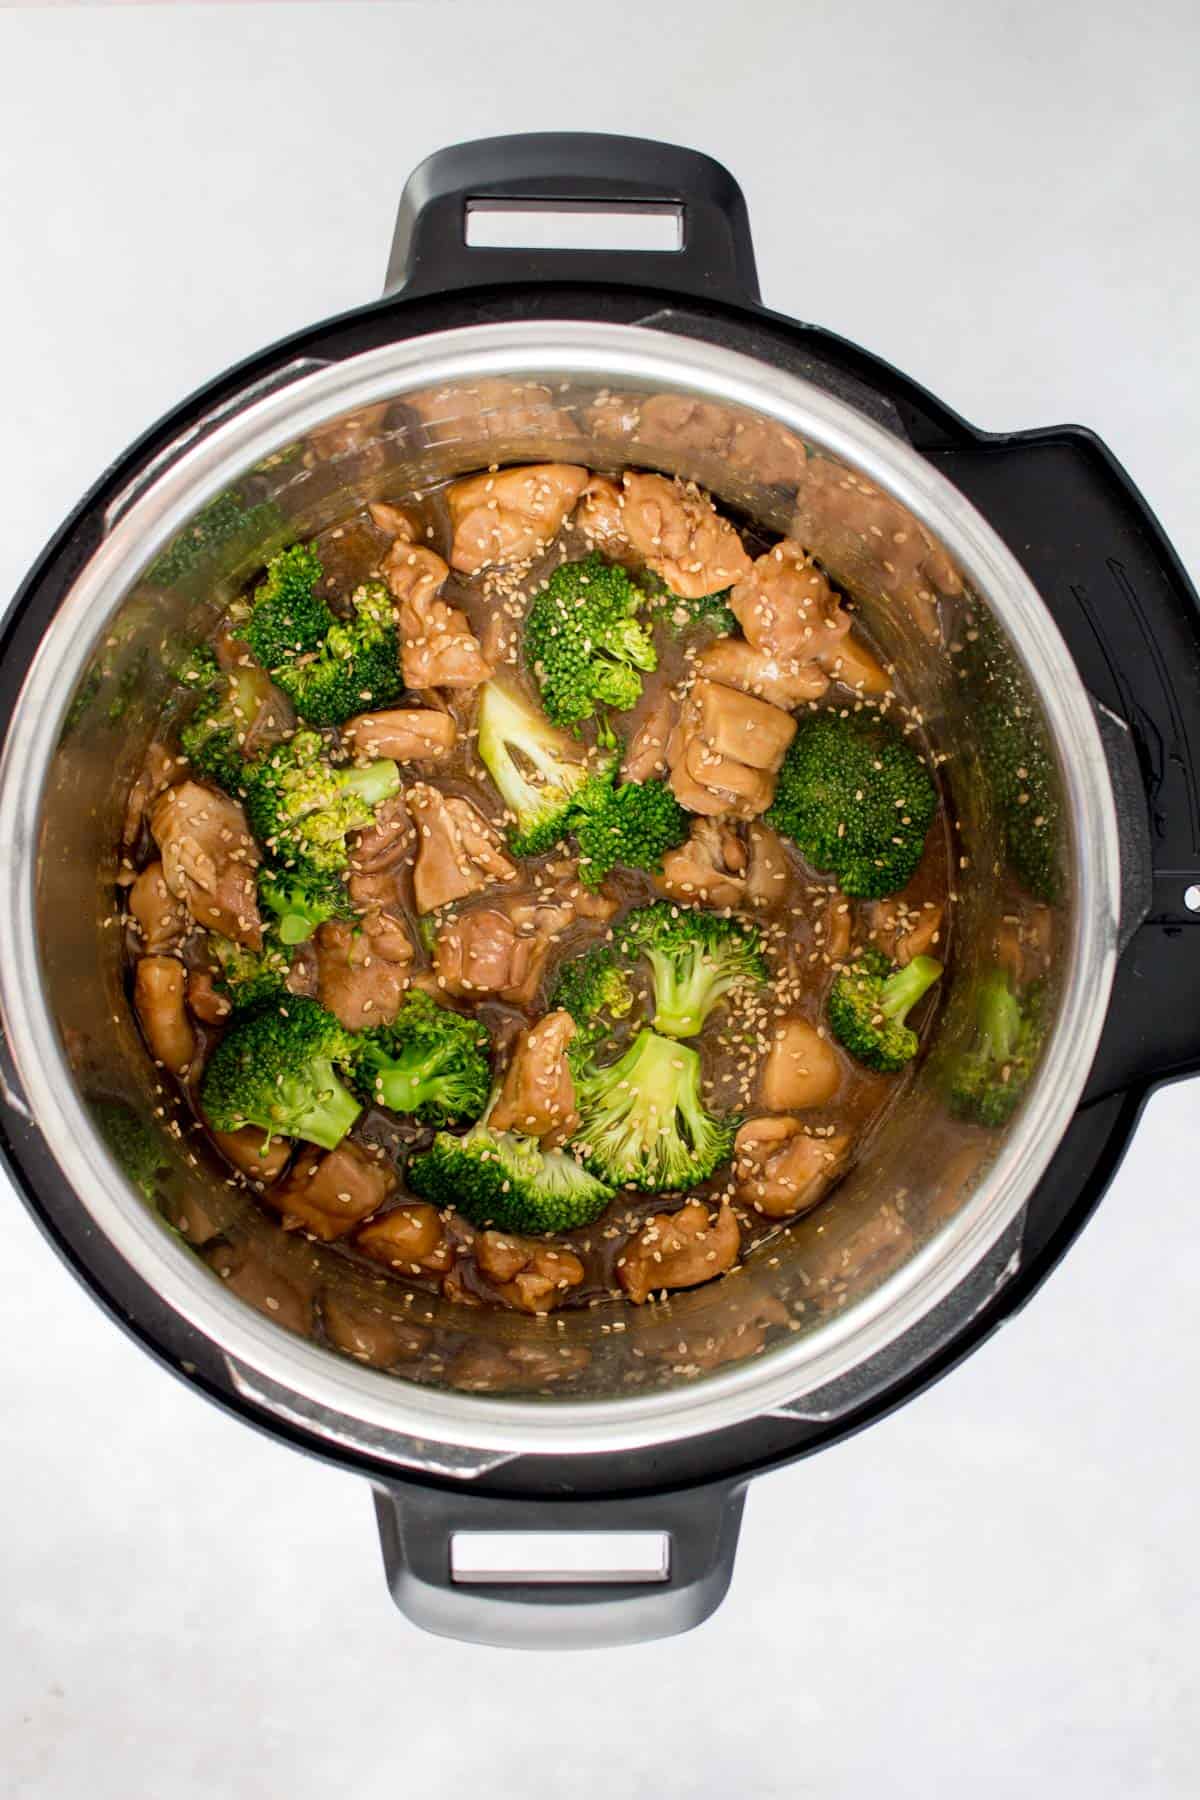 Instant Pot chicken and broccoli.